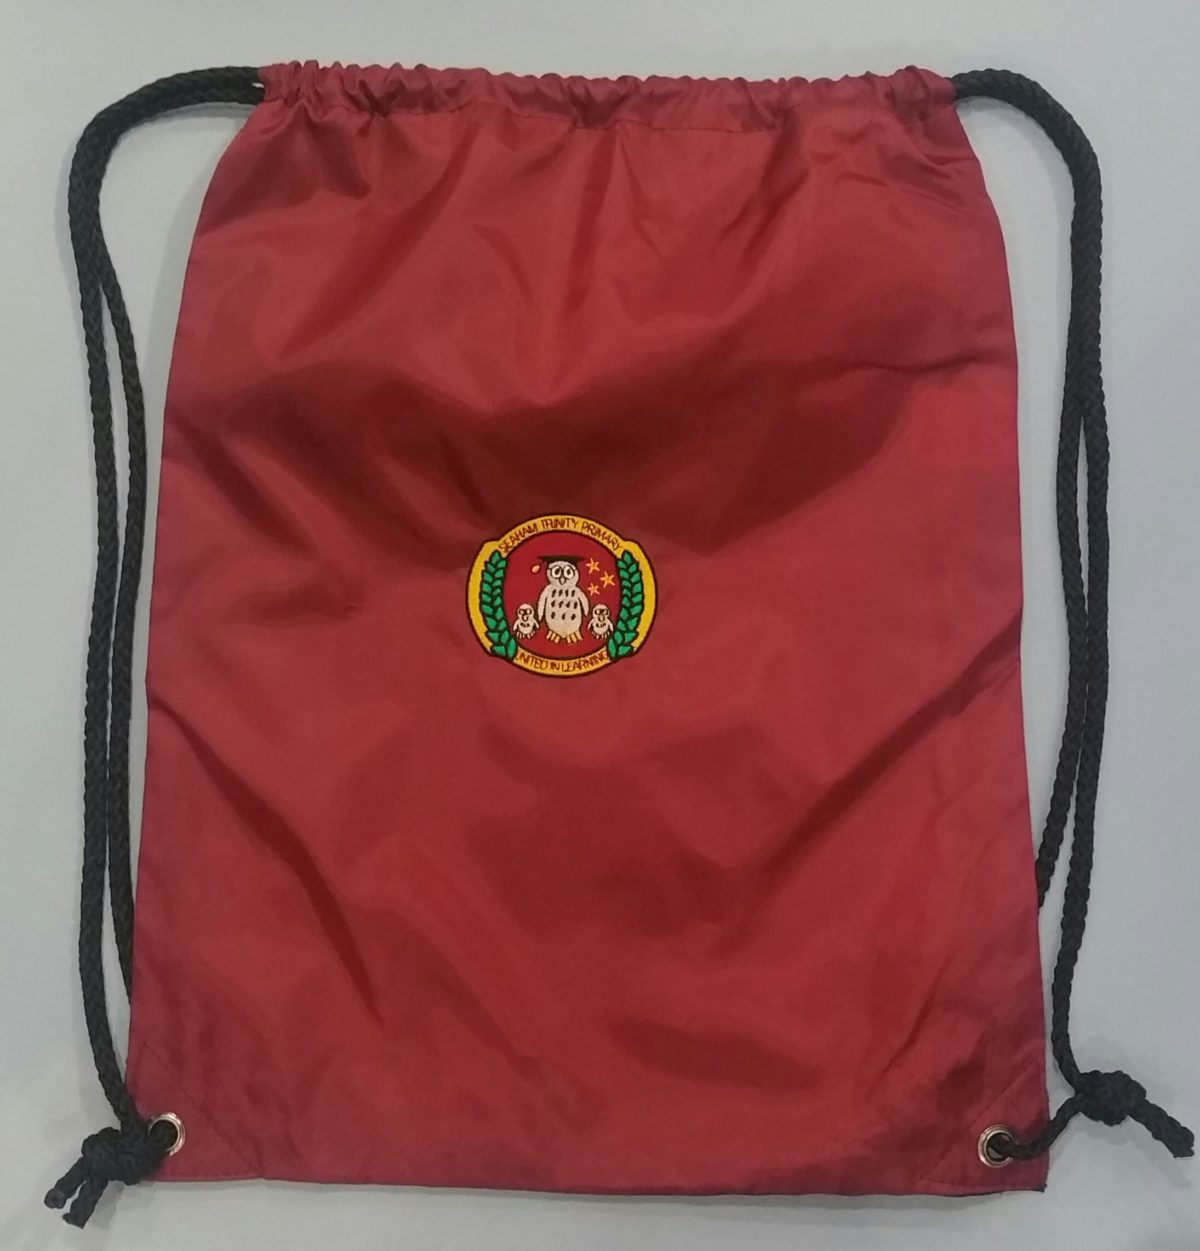 P.E. KIT BAG with embroidered school logo